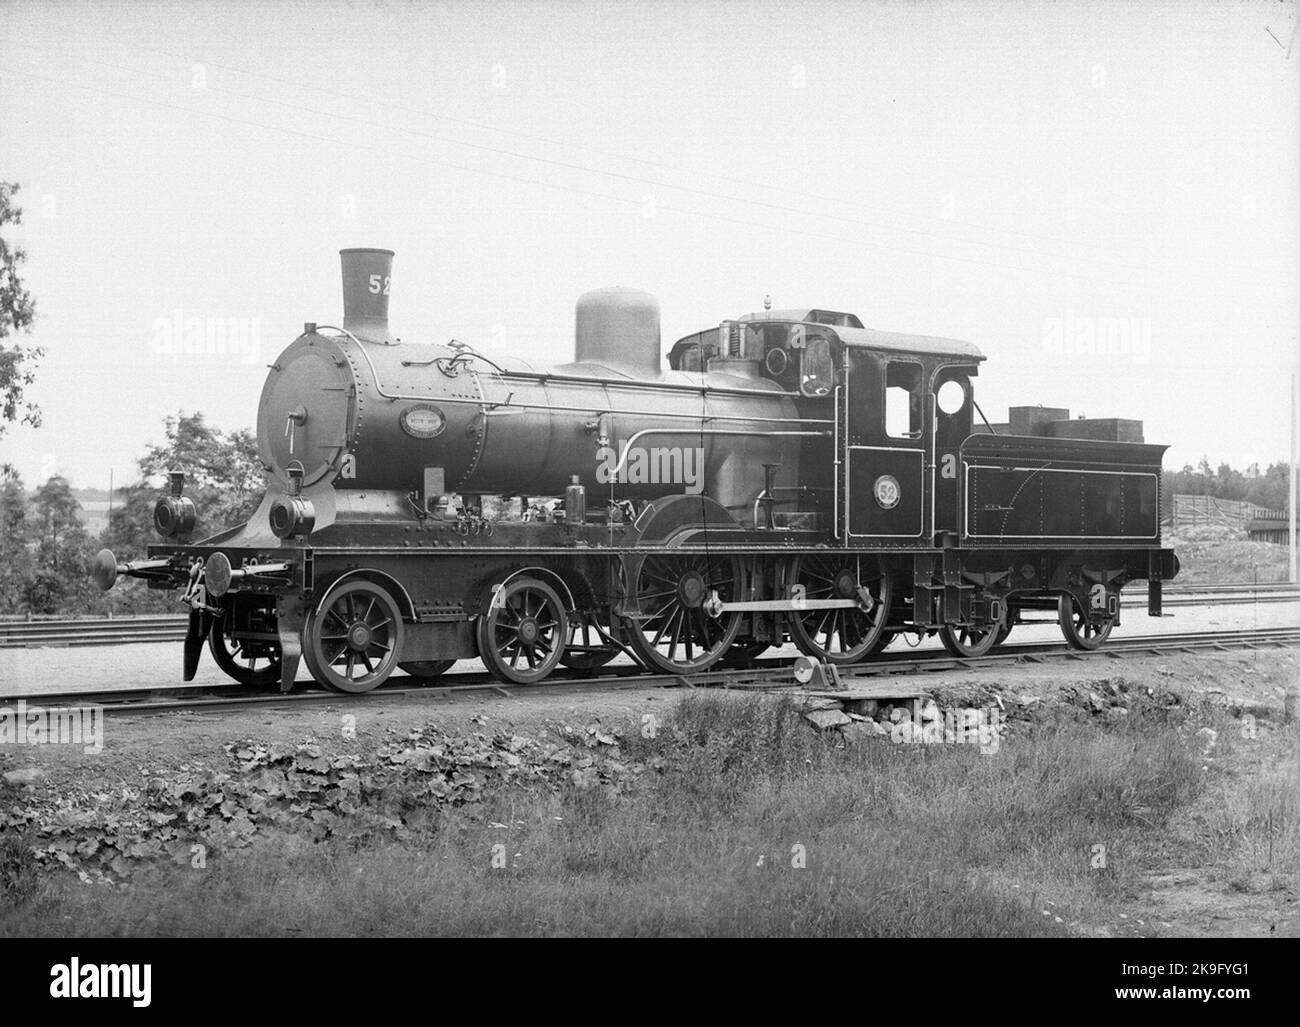 BJ C3 52. Delivery Photo. The locomotive was manufactured by Nohab, manufacturing number 775. 1972 went to Nohab's steam locomotive club. Stock Photo